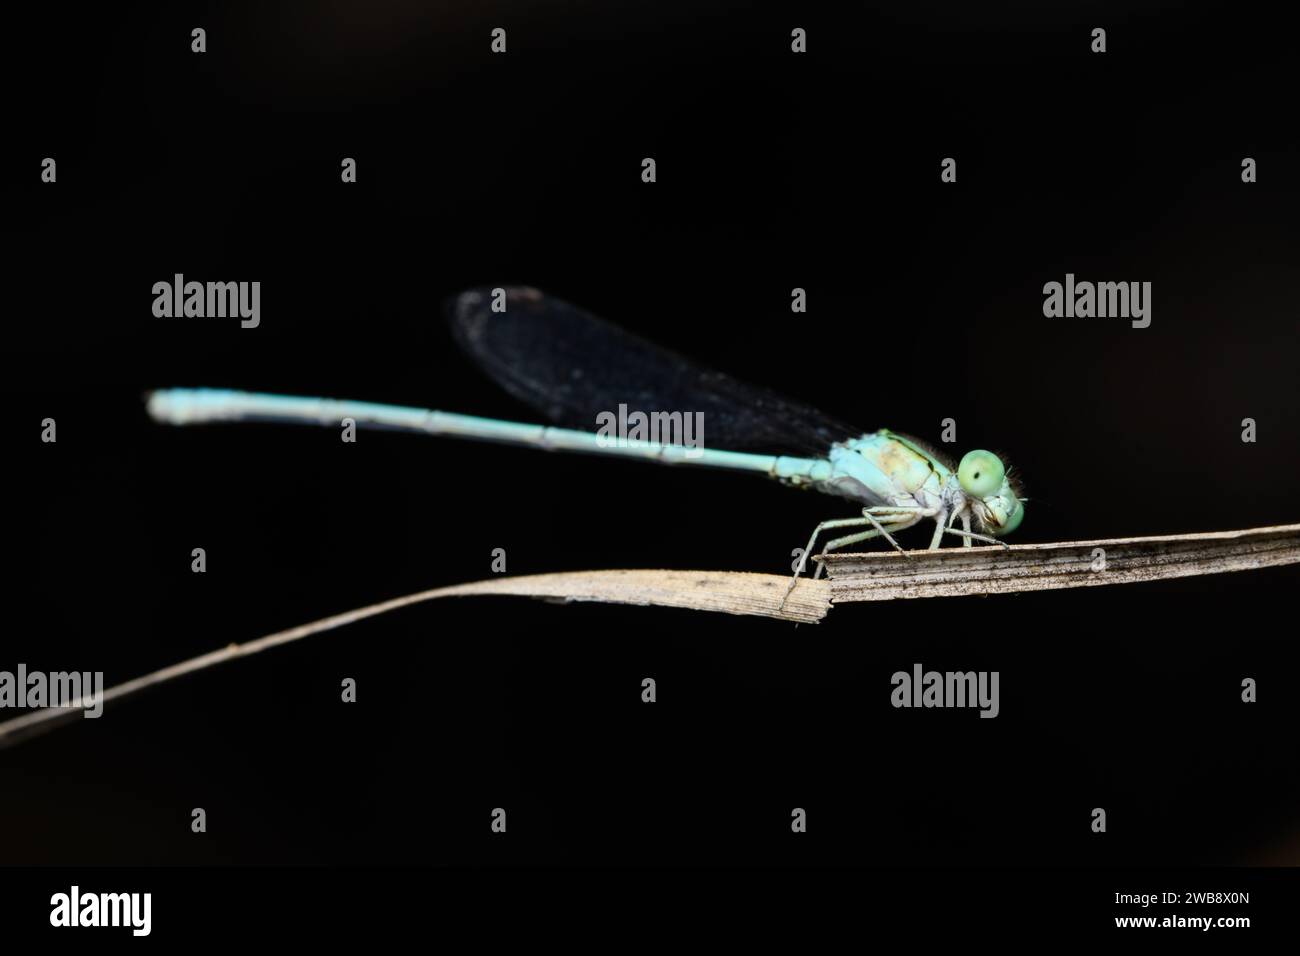 A Blue River Damselfly (Pseudagrion microcephalum) rests on a dry twig, highlighted against a dark background. Stock Photo